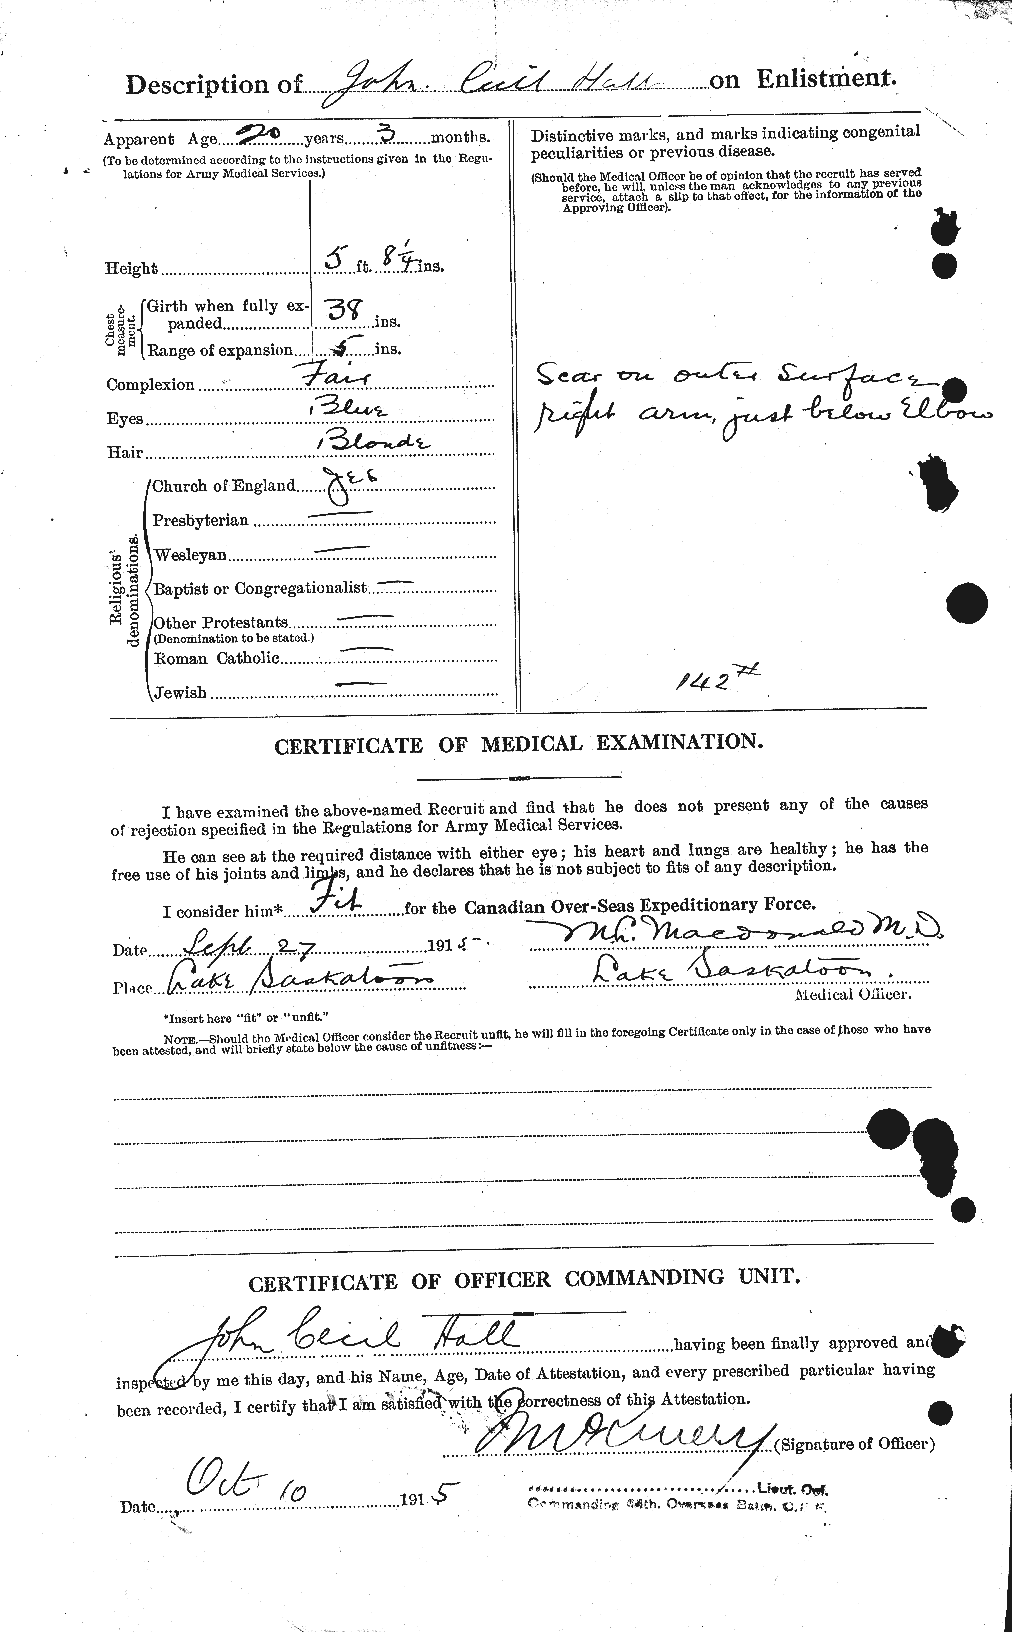 Personnel Records of the First World War - CEF 374276b